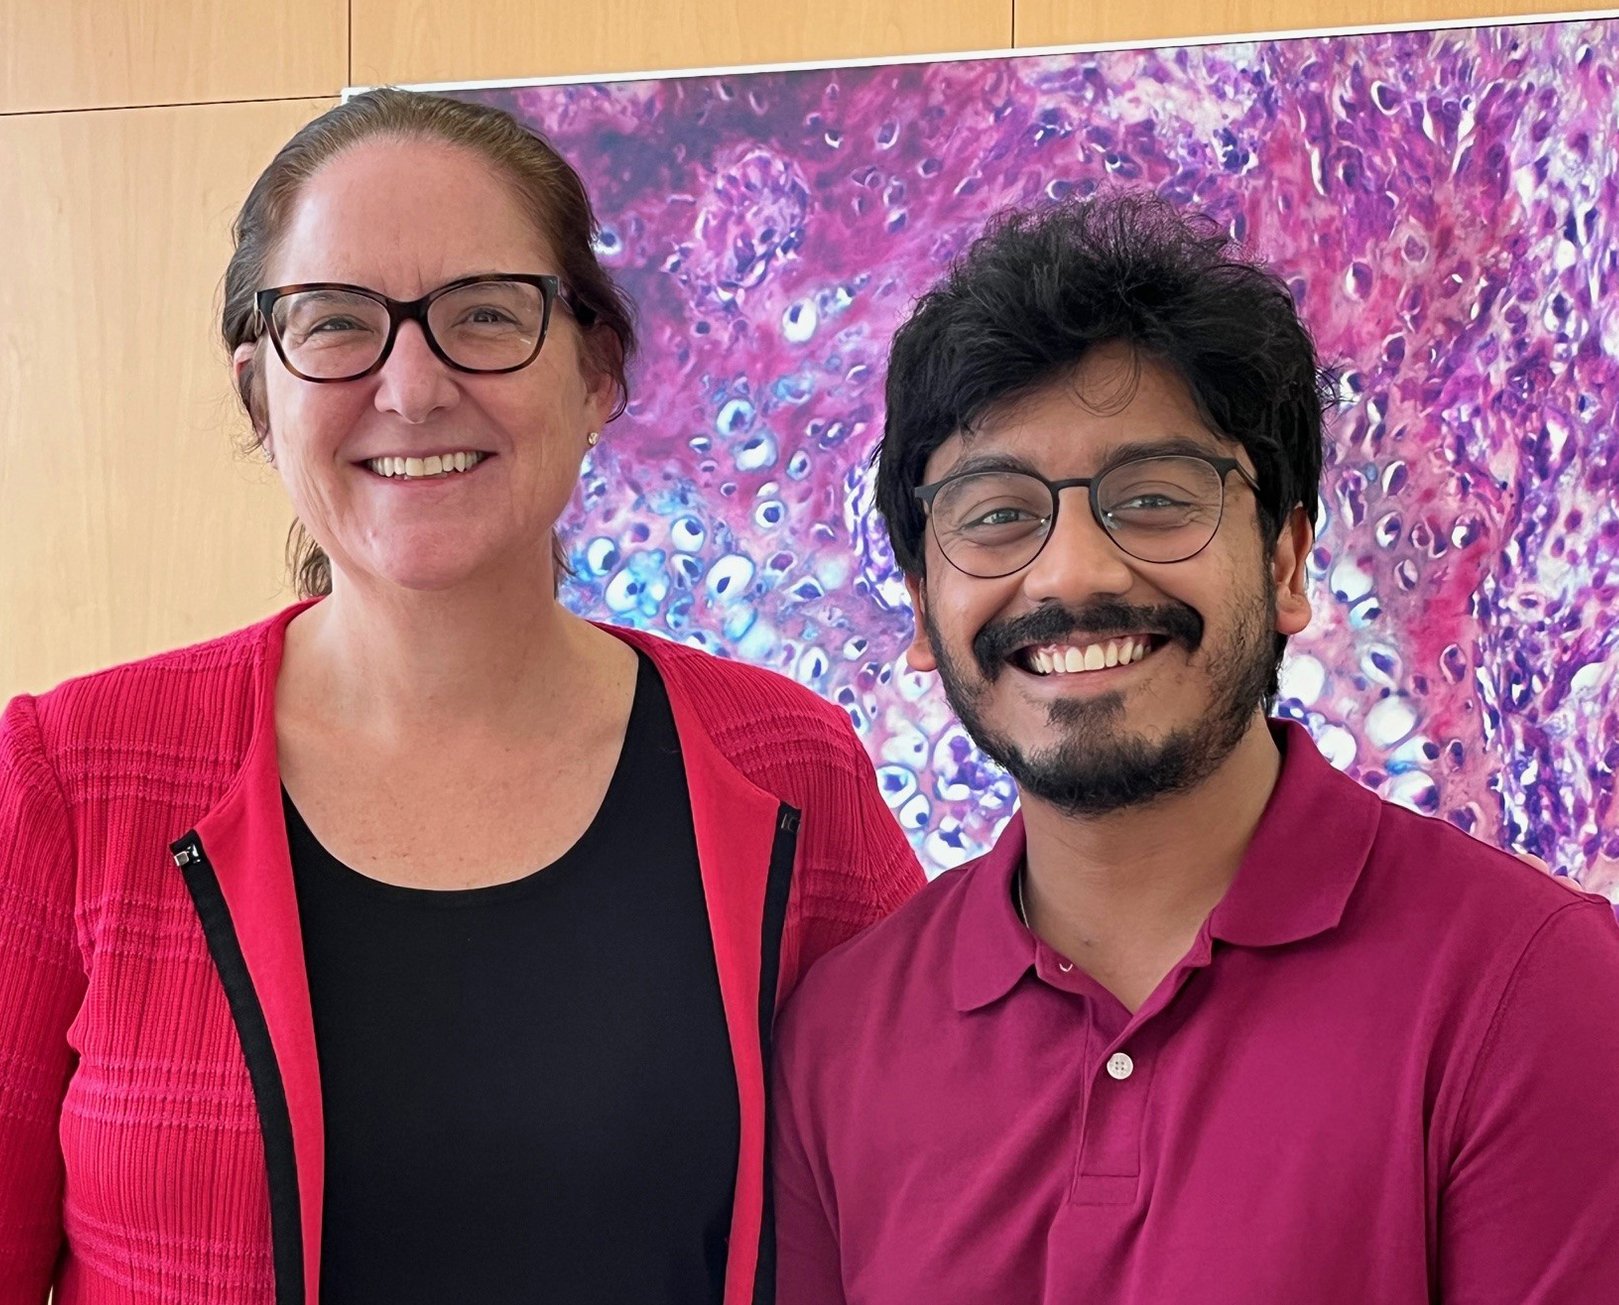 Dr. Louise McCullough and PhD student Anik Banerjee